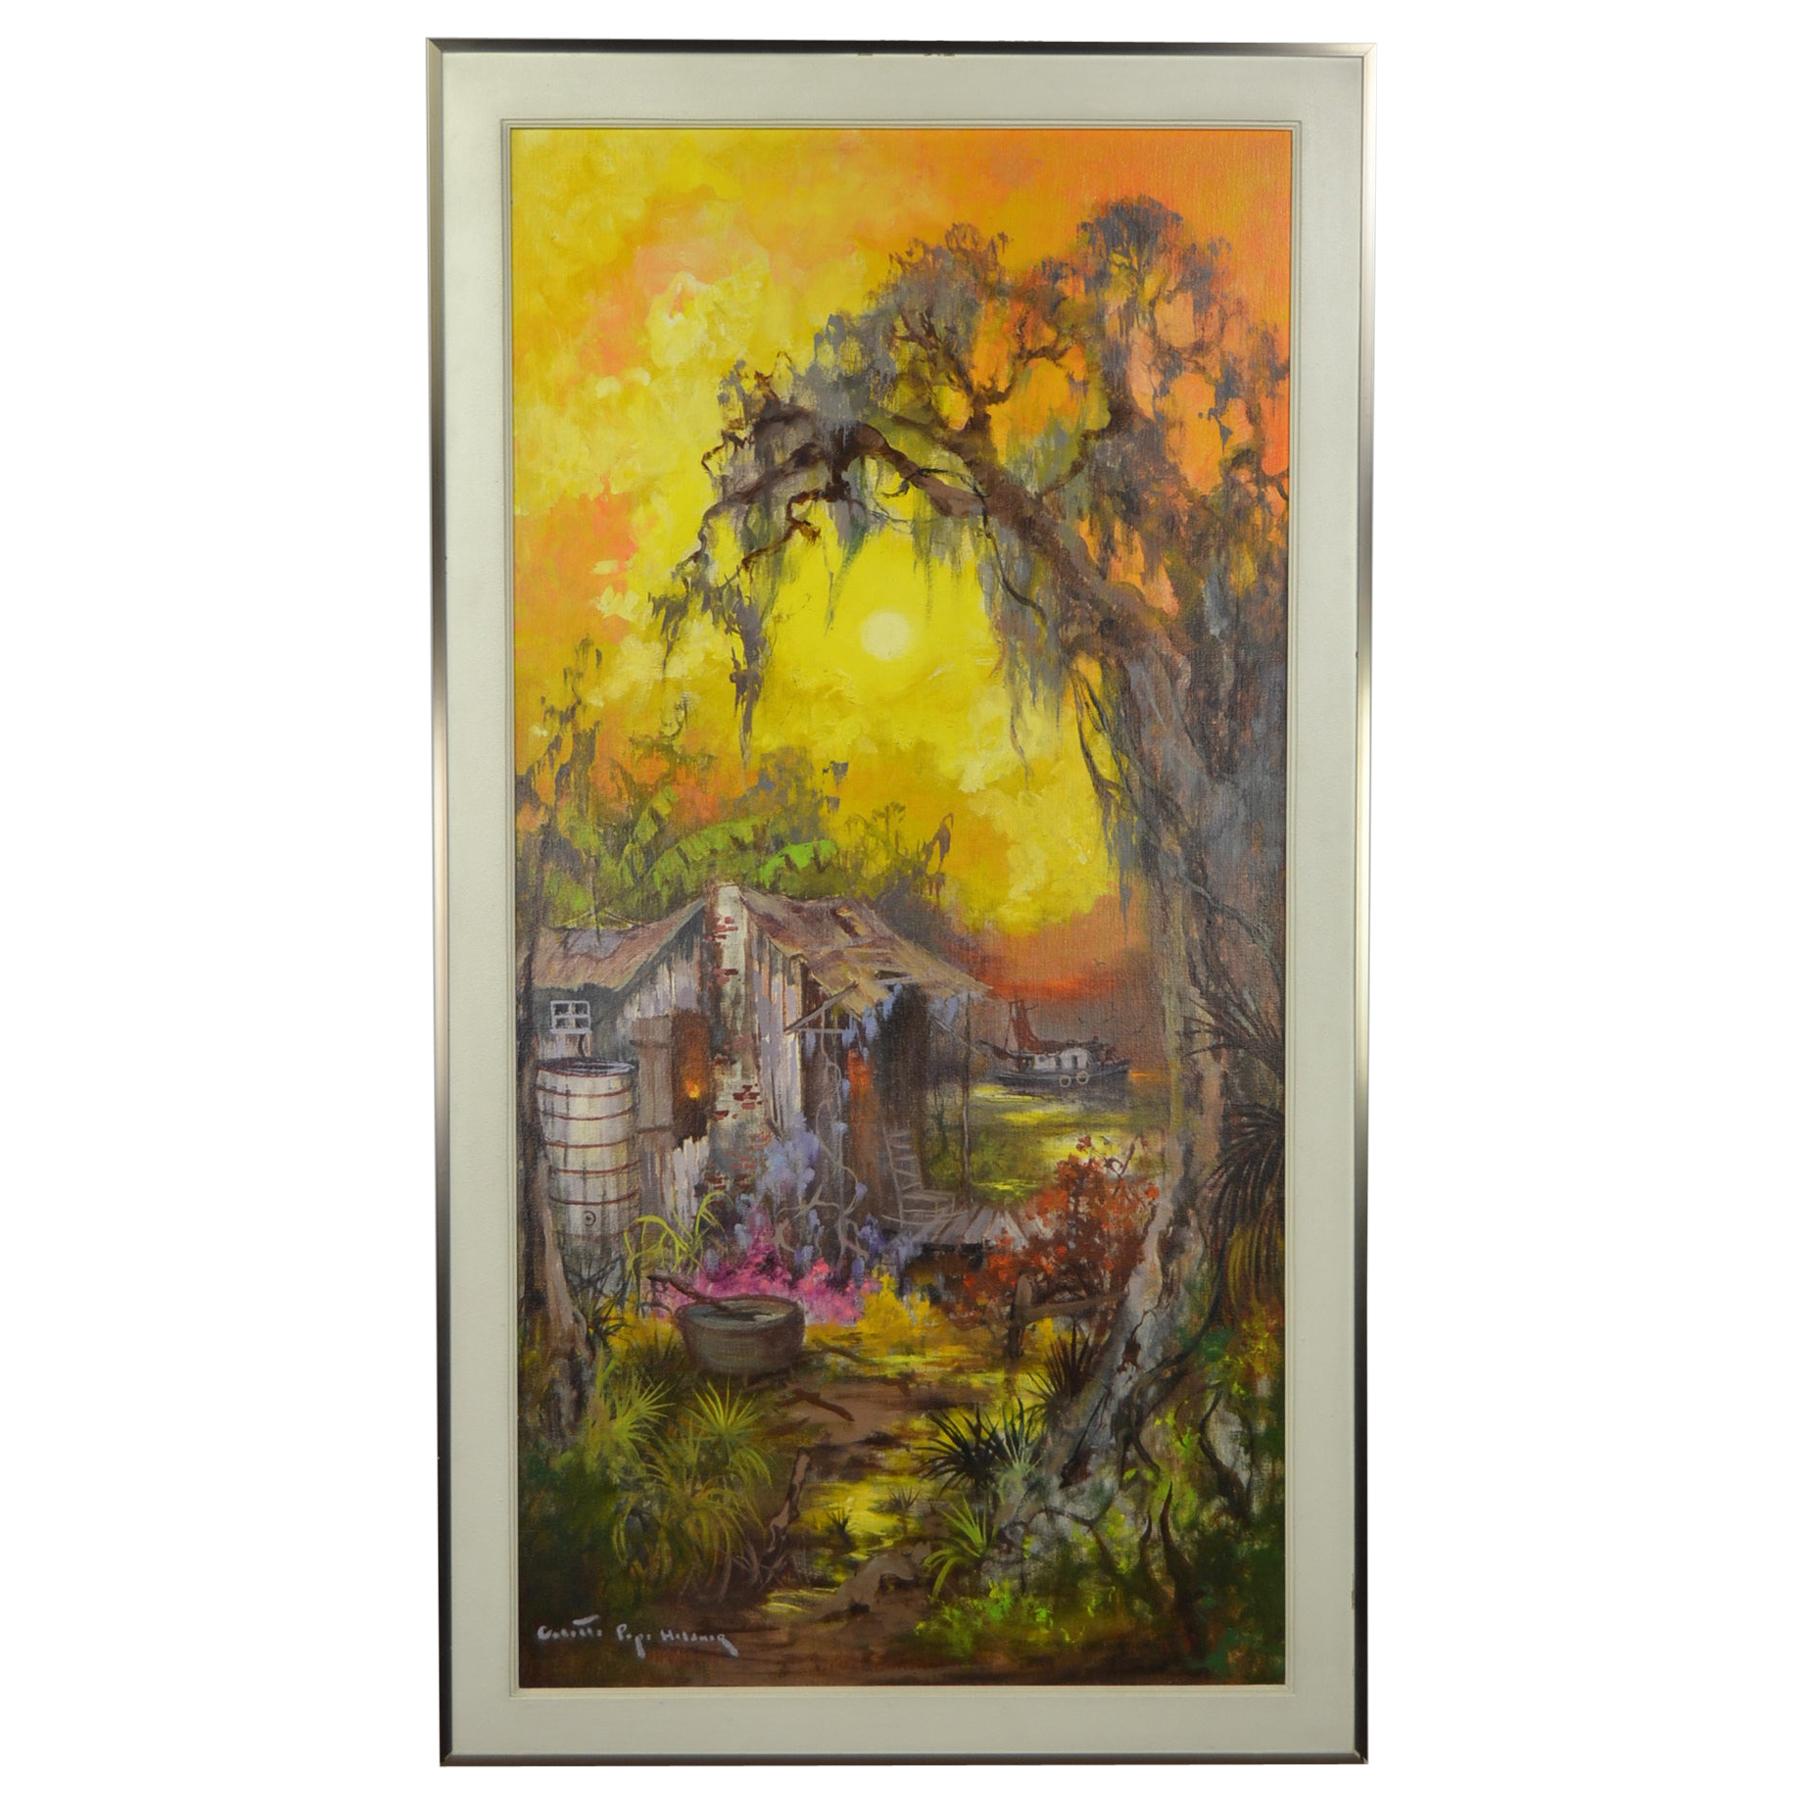 Colette Pope Heldner, Signed Oil on Canvas Painting, Swamp Idyll